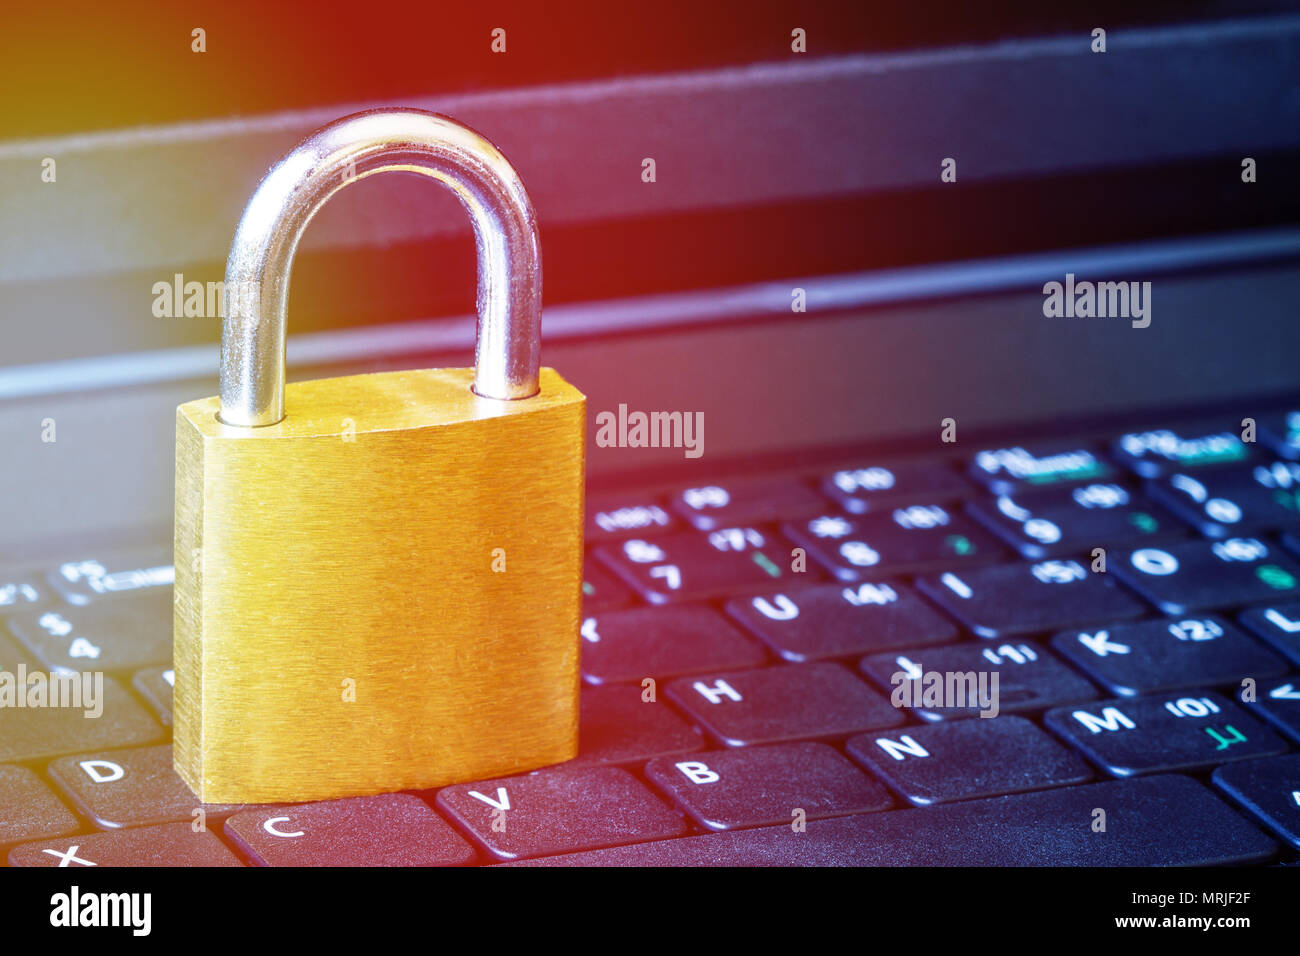 Golden padlock on computer laptop keyboard with sunflare effect and copy space. Concept of Internet security, data privacy, cybercrime prevention. Sel Stock Photo